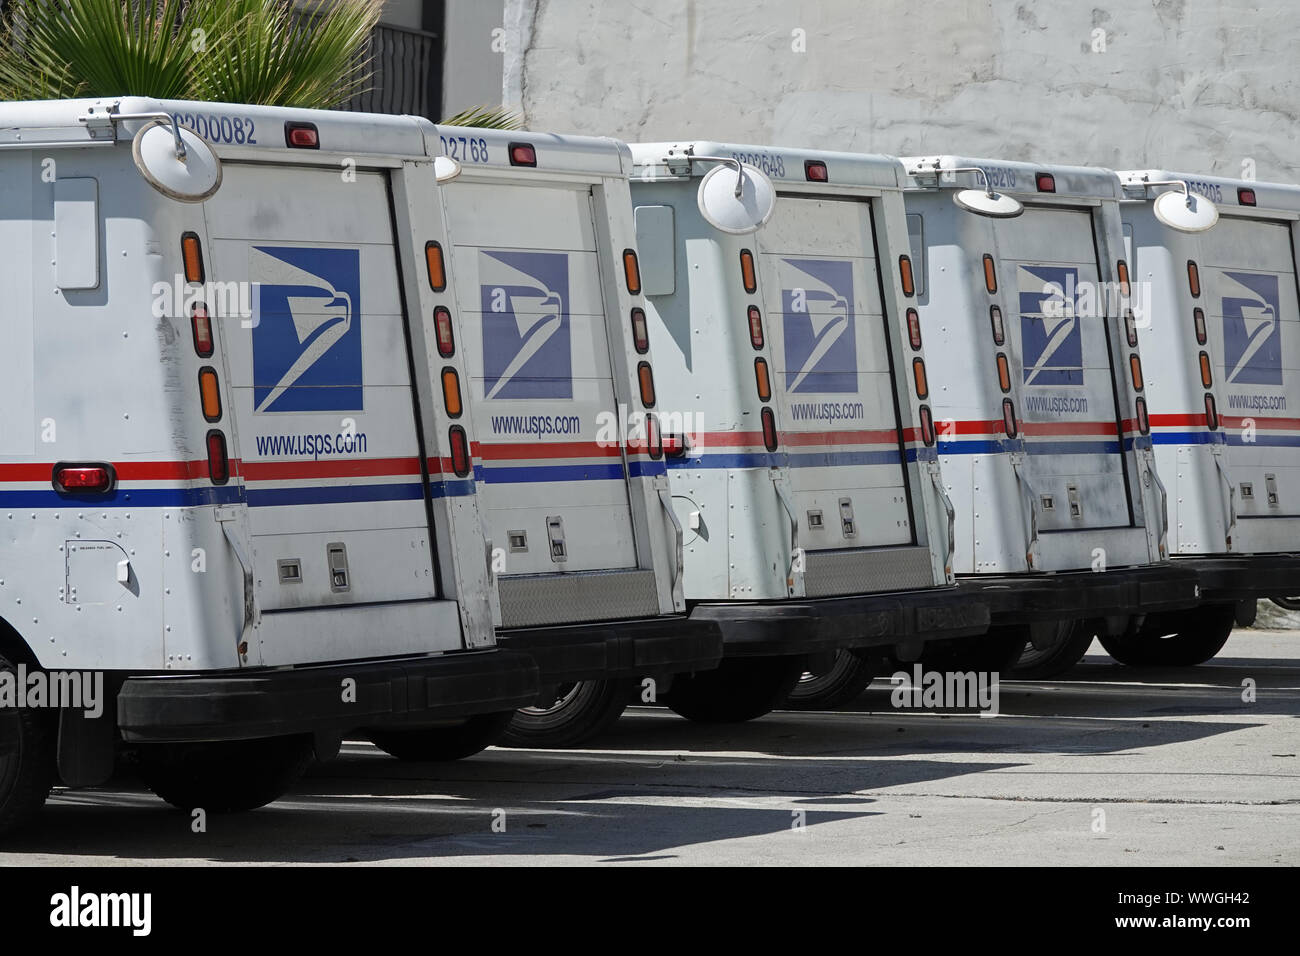 Los Angeles, CA / USA - Aug. 18, 2019: Grumman LLVs (Long Life Vehicles), owned and operated by the United States Postal Service (USPS), are shown. Stock Photo